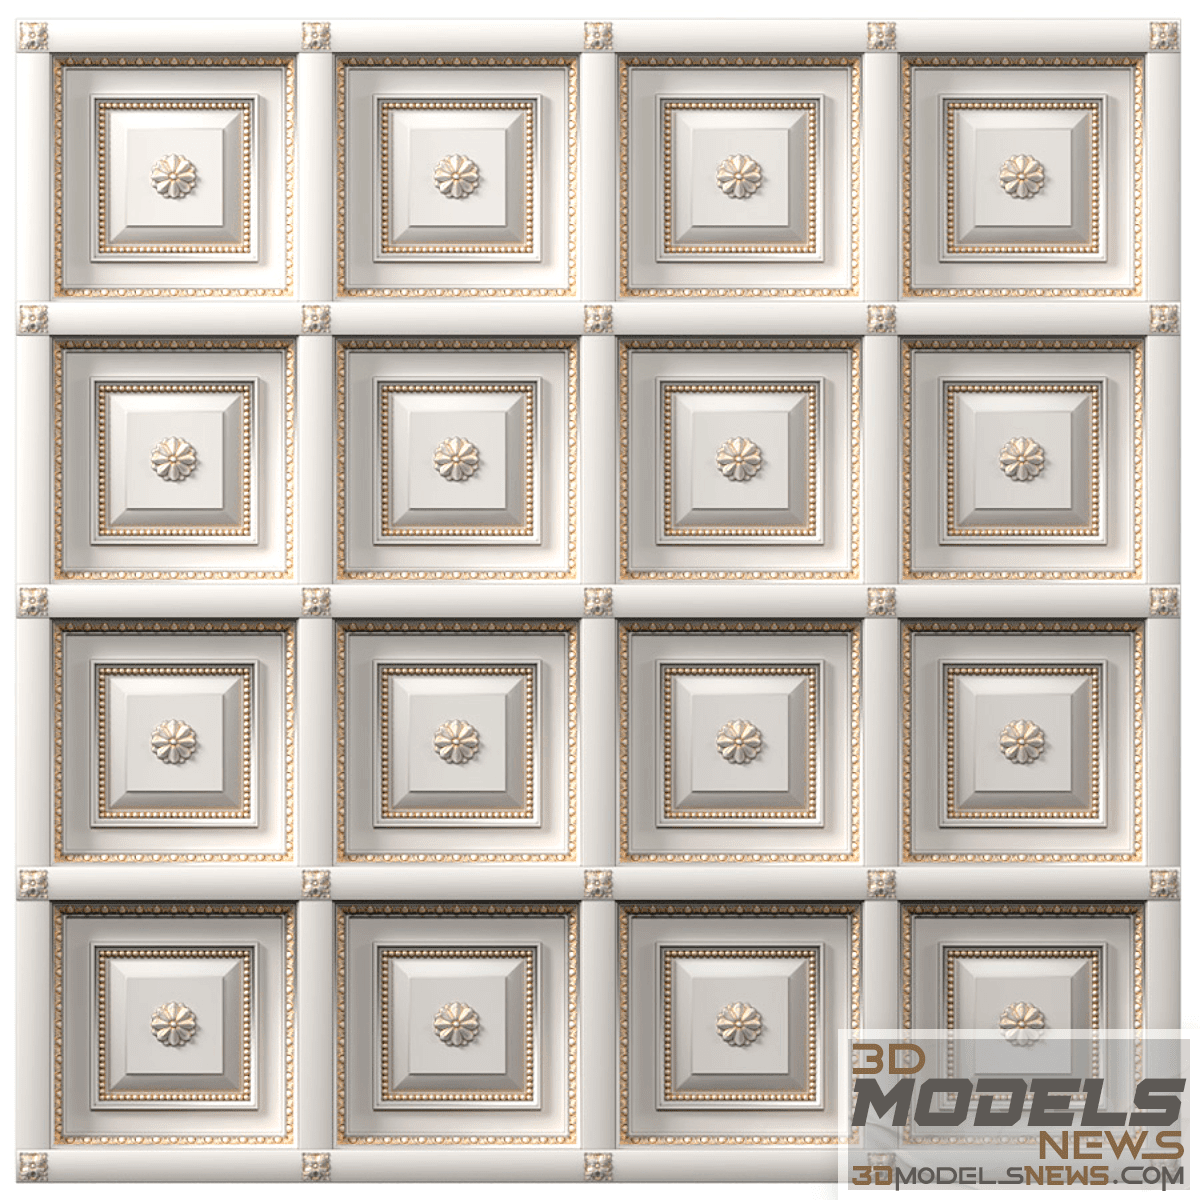 Classic coffered ceiling model with gilding